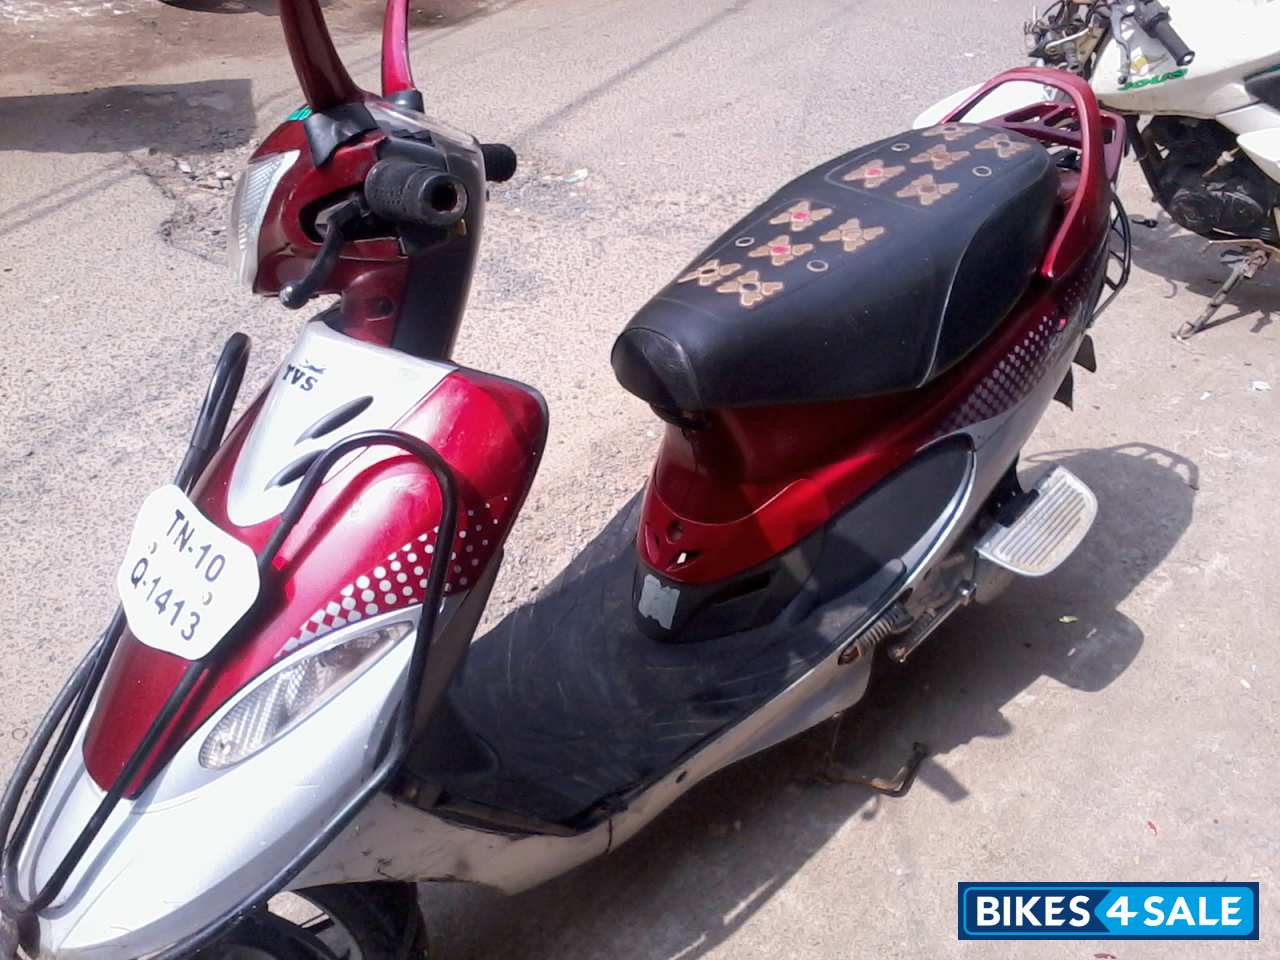 Used 2006 model TVS Scooty Pep Plus for sale in Chennai ...